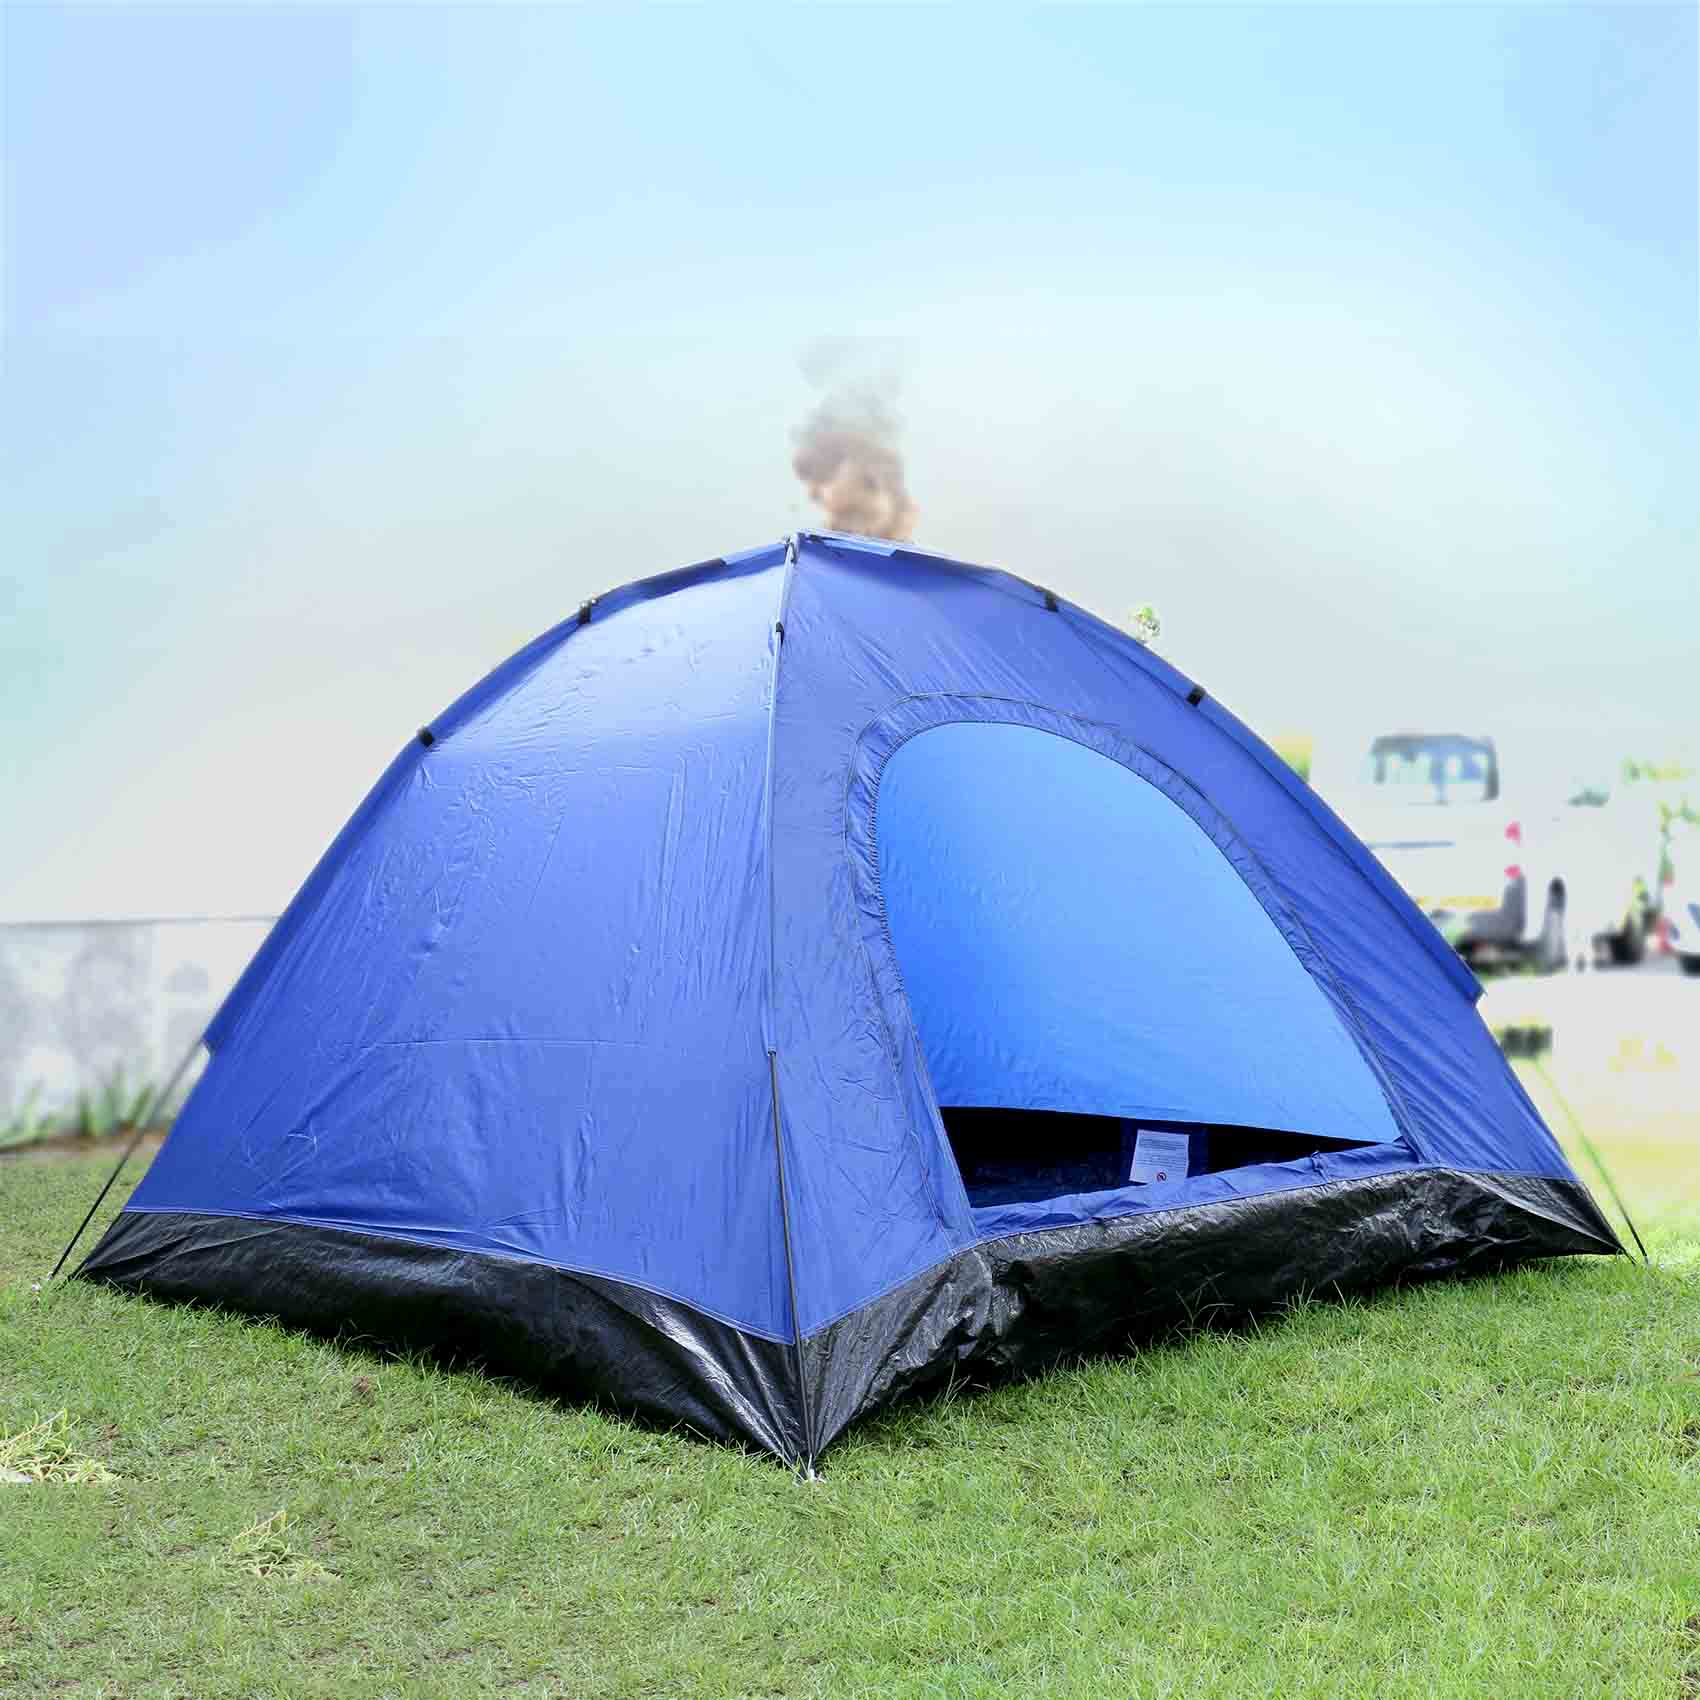 CAMPMATE DOME TENT CAMPING TENT 4- 6 PERSON 210X210X130CM  CM15101 OUTDOOR CAMPING